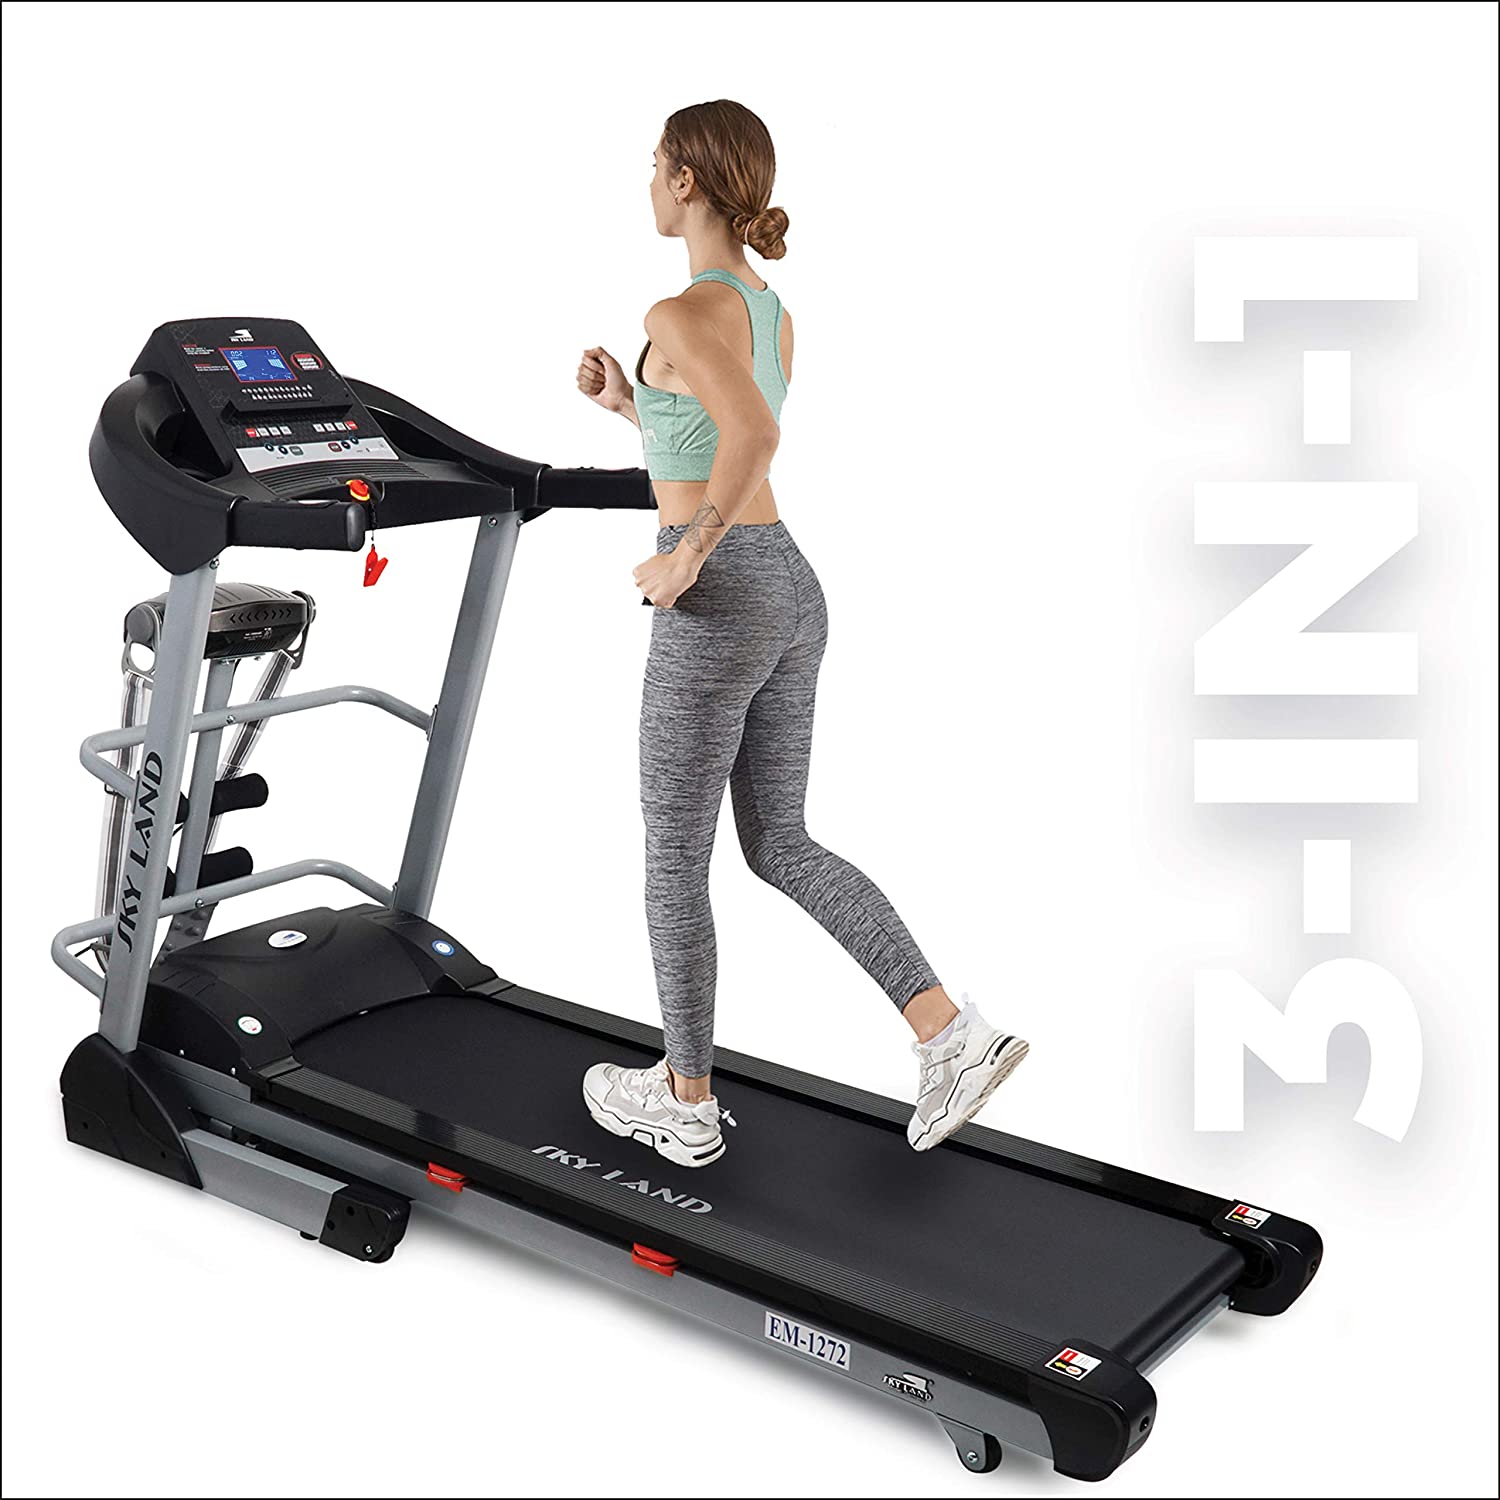 MIRACLE FITNESS MOTORIZED TREADMILL WITH MASSAGER + BLUETOOTH SPEAKER